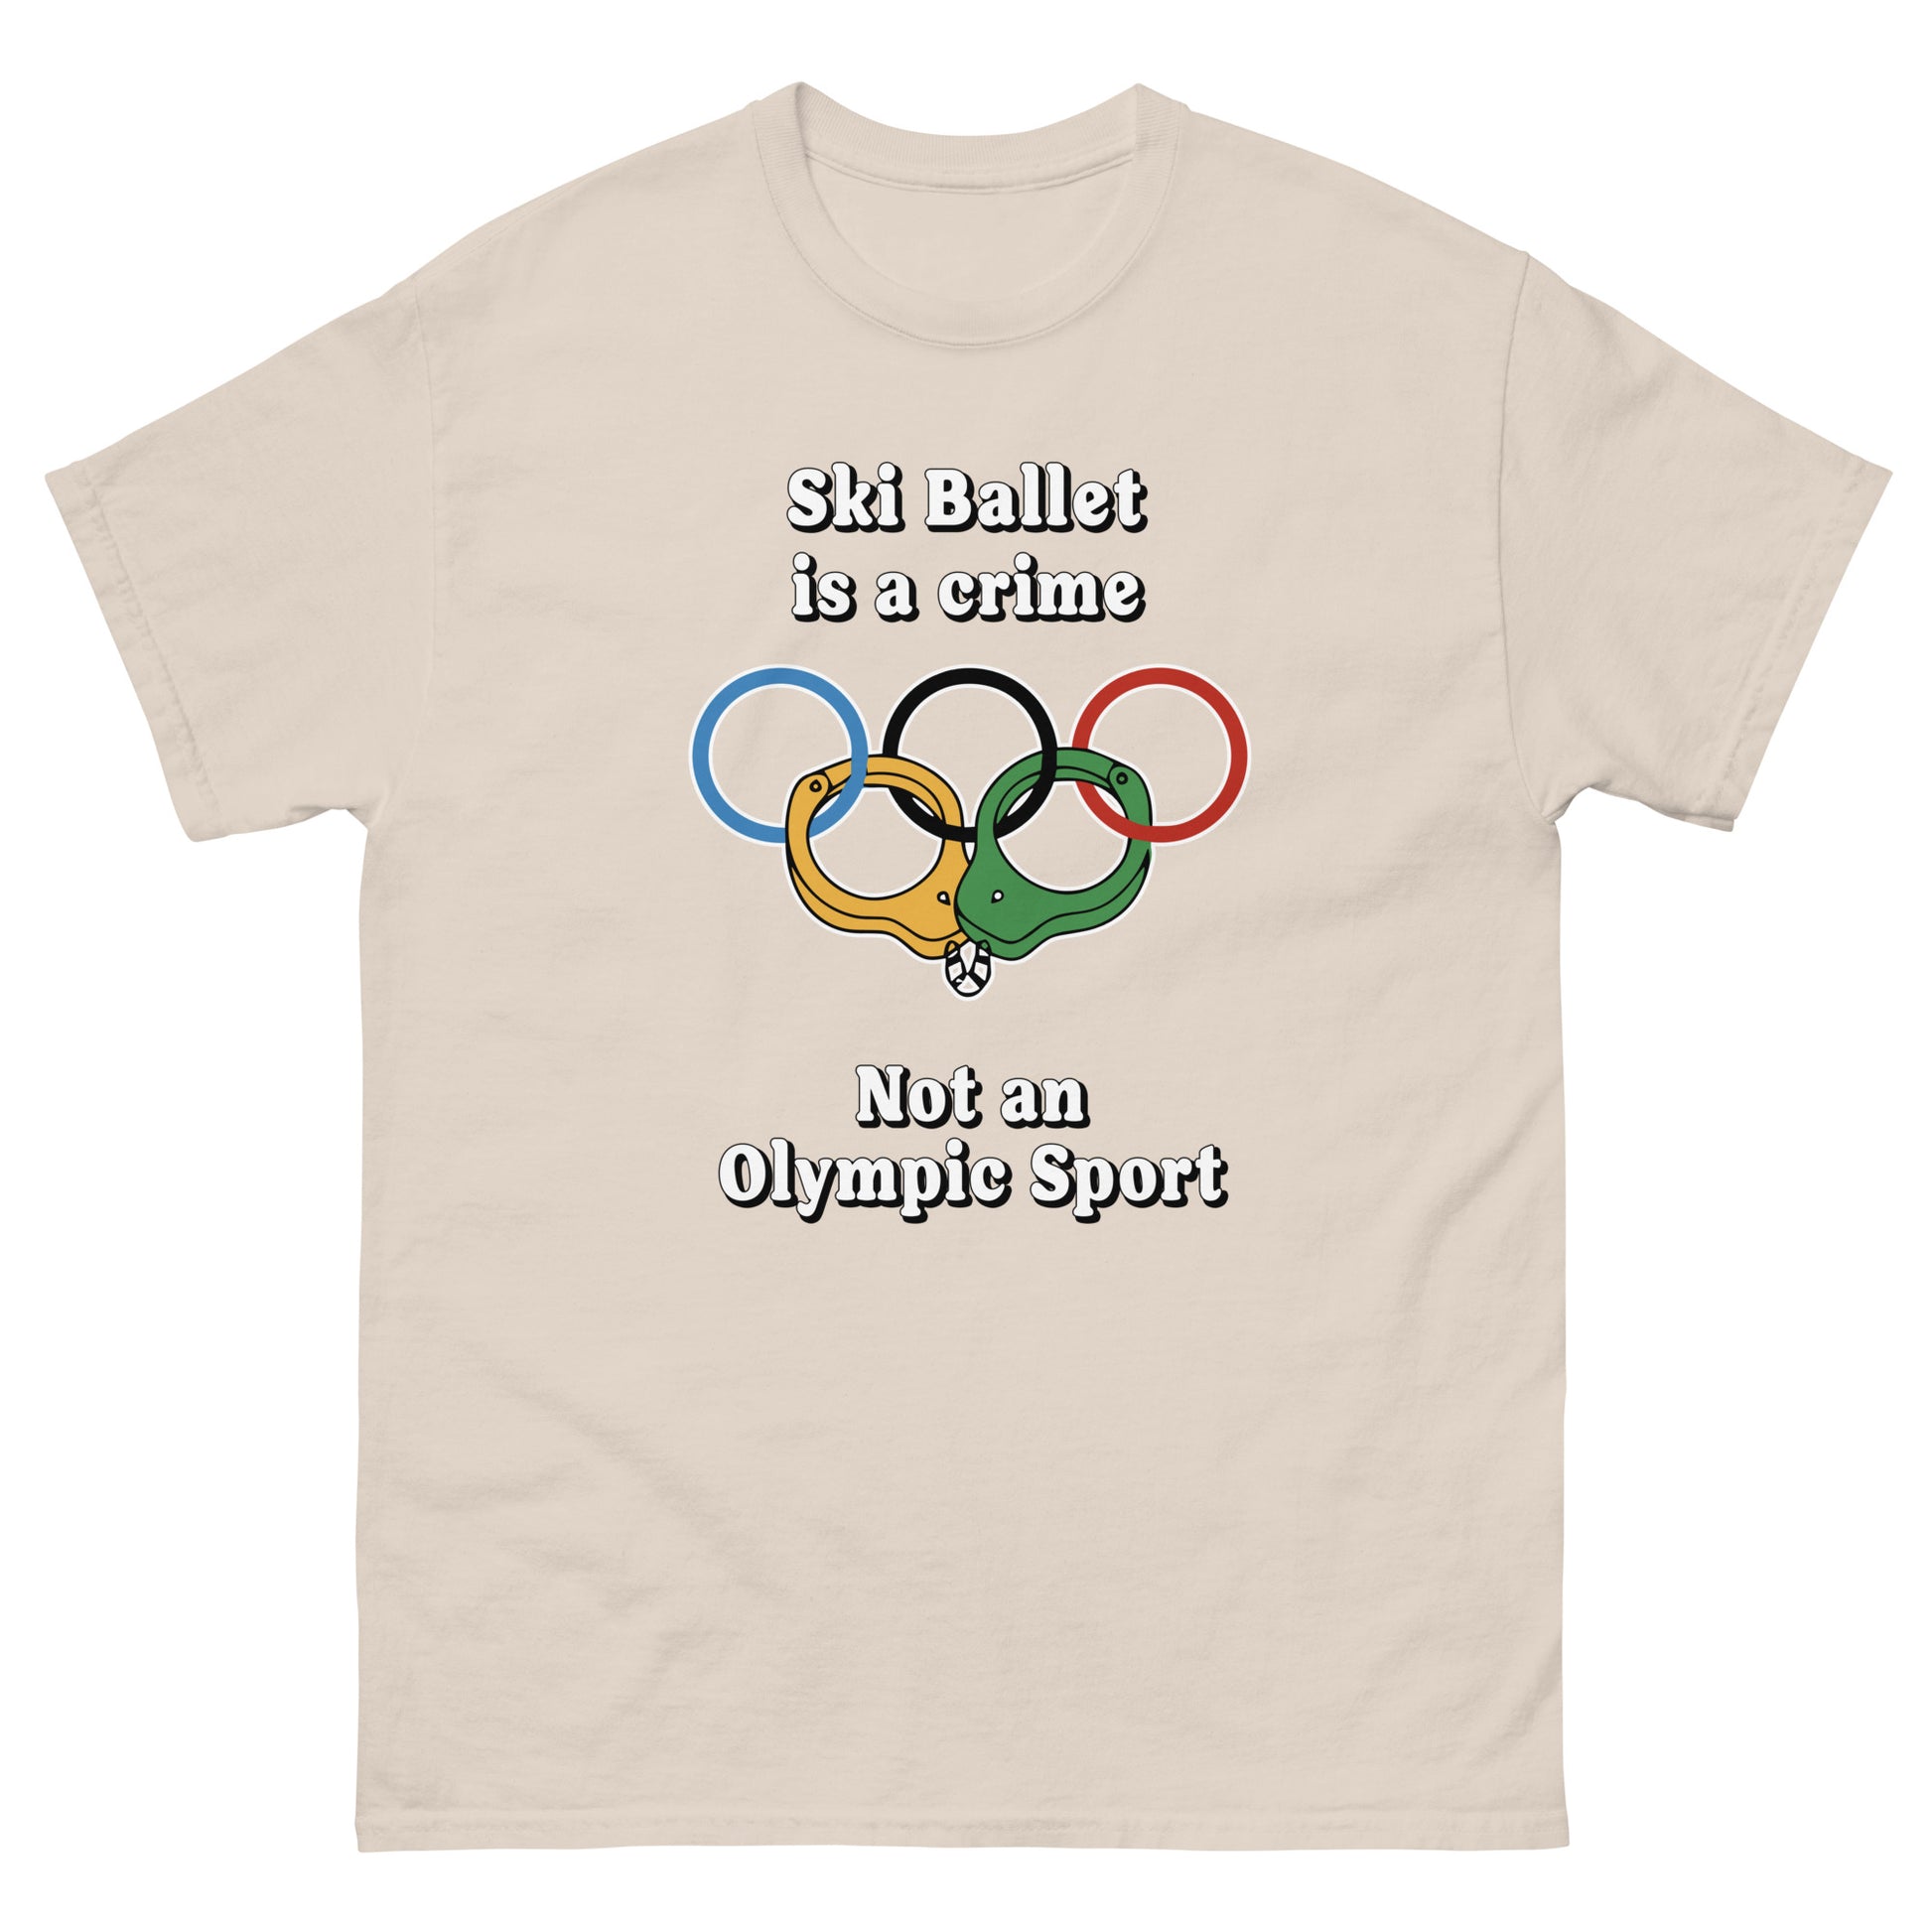 Ski Ballet is a crime not an olympic sport design printed on t-shirt by Whistler Shirts